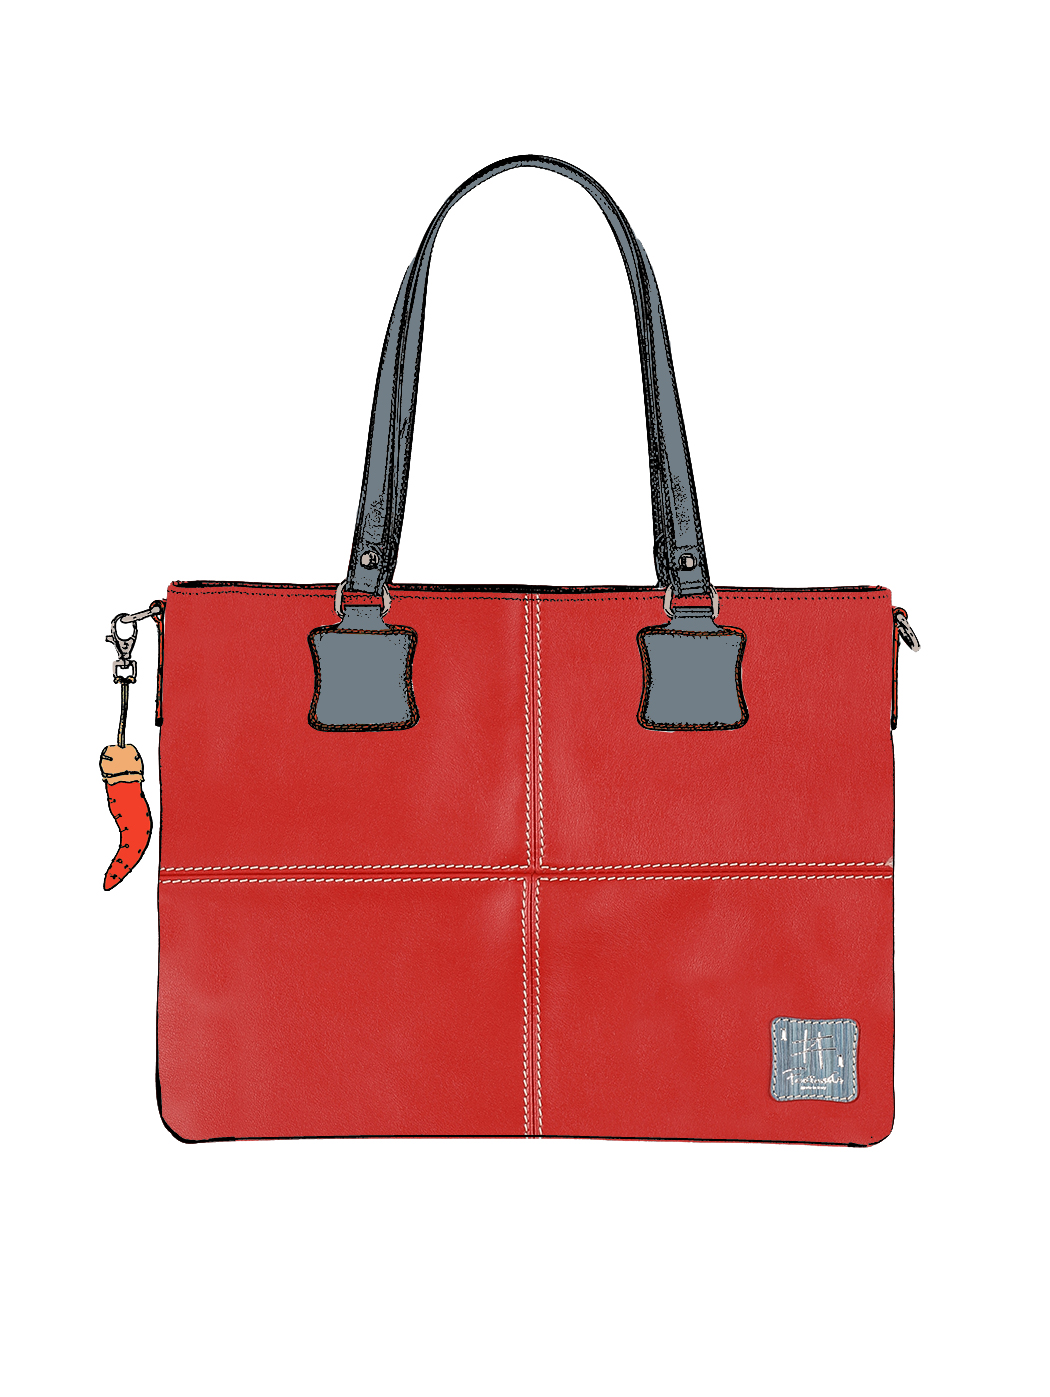 Nuovo Style Firenze Crossbody / Tote Bag in Red Genuine Italian Leather  Bordeaux